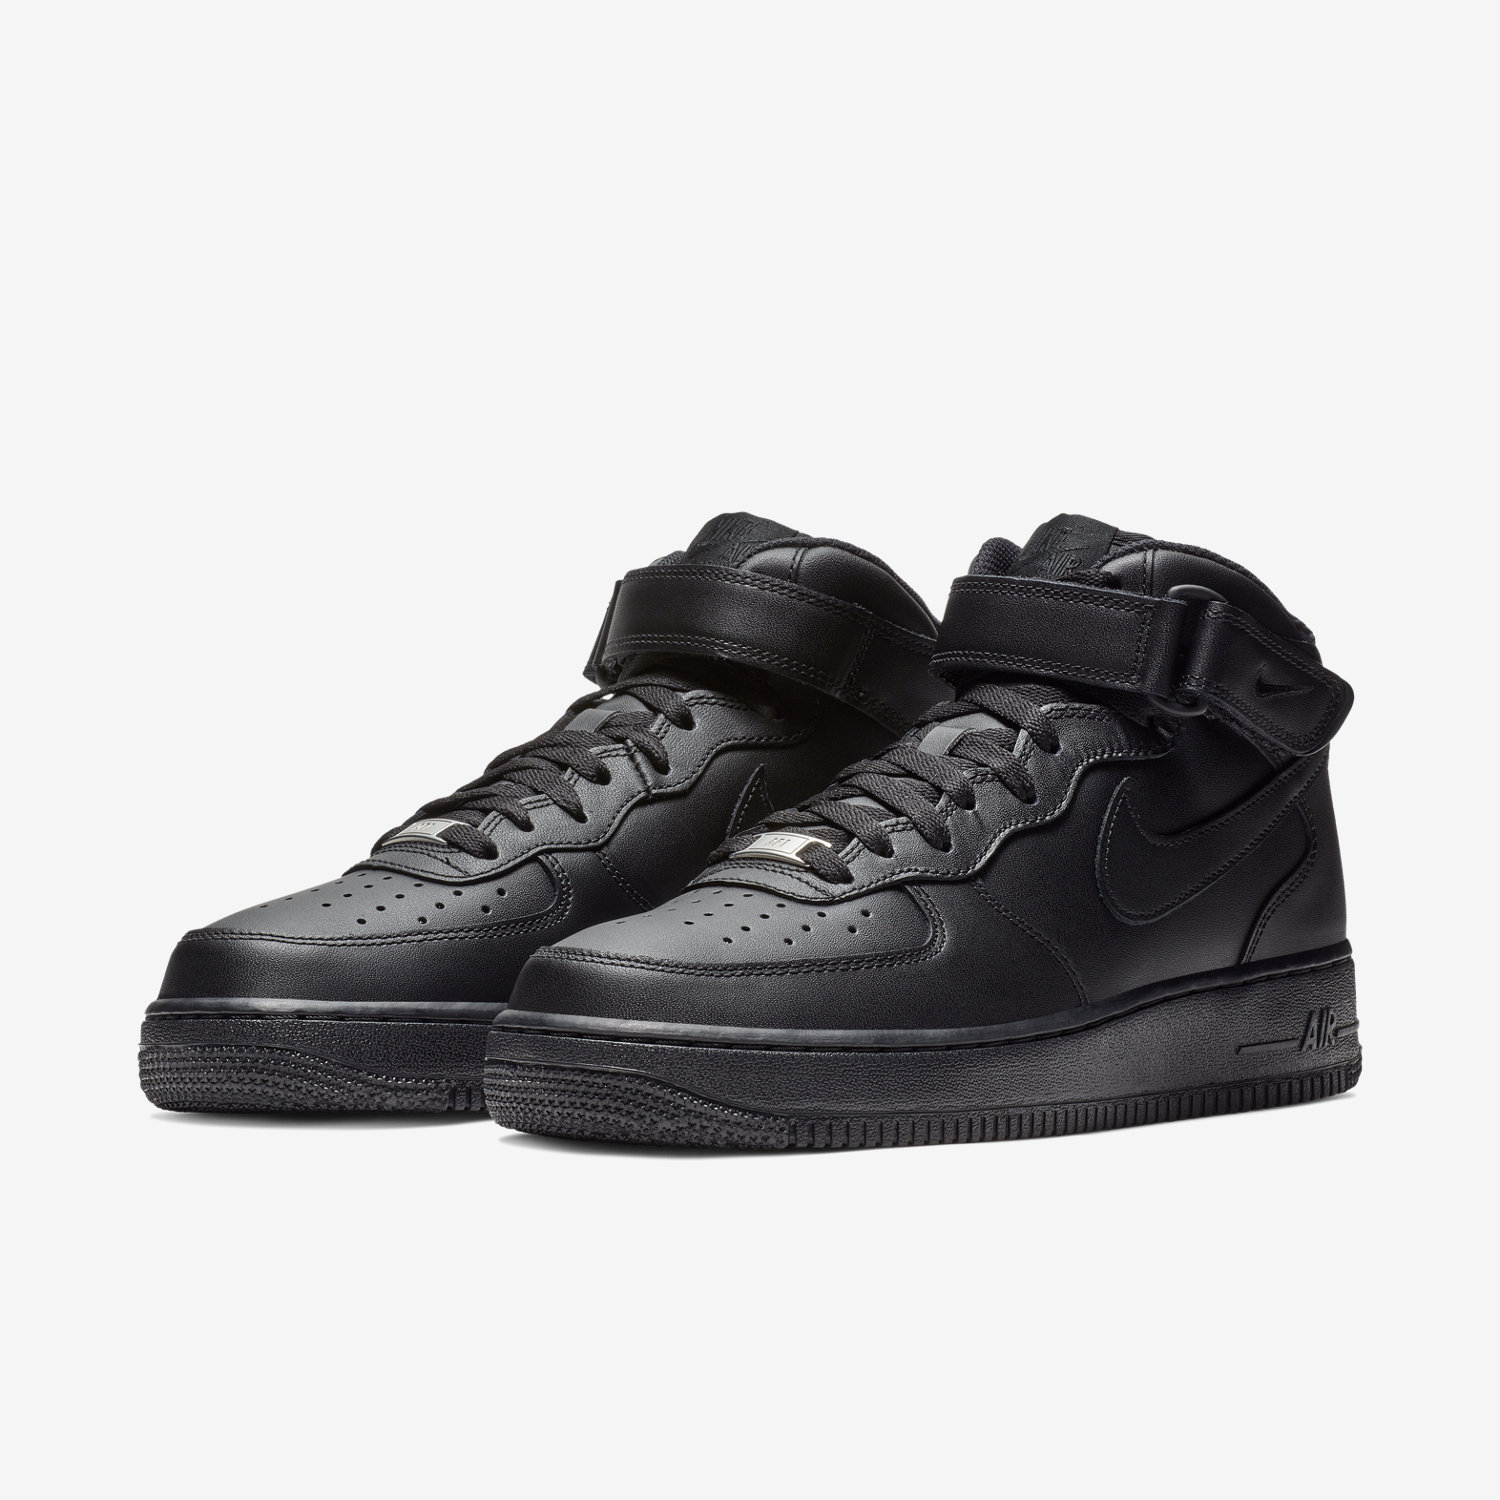 negro air force one hombre good 1510a 06091